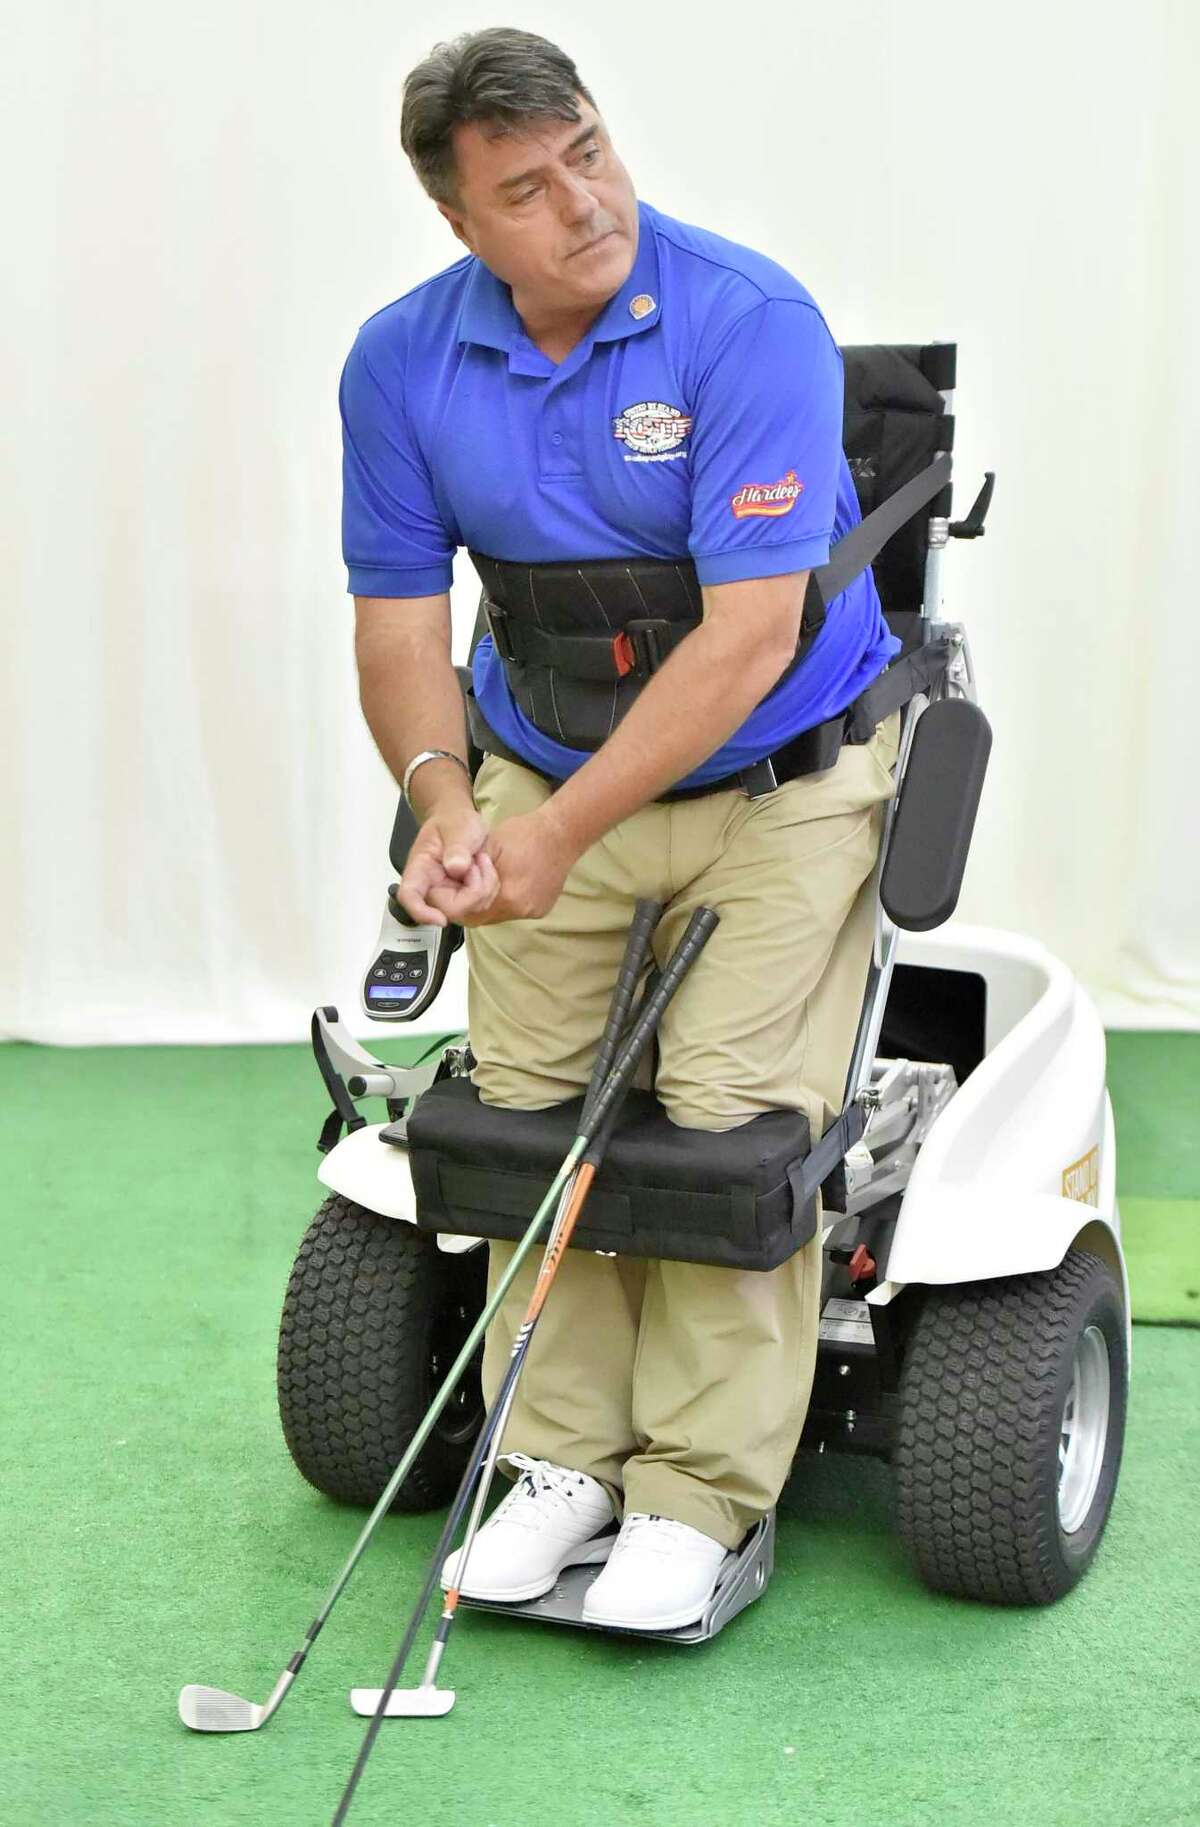 Anthony Netto, of Nevada, a former member of the South African Special Forces attached to the British Royal Marines who was shot and paralyzed in 1991 during the Gulf War, and is the founder of the Stand Up And Play Foundation and co-inventor of the Paramobile-Paragolfer, demonstrates the moving standing therapy mobile device Thursday that was recently acquired through donations by the Gaylord Hospital adaptive sports program in Wallingford. The Paramobile gives wheelchair users mobility and a standing therapy, providing a better quality of life. It functions as a rehabilitative aid, helps improve circulation, and respiration, reduces muscle spasticity, provides pressure relief on organs and minimizes occurrence of pressure sores.